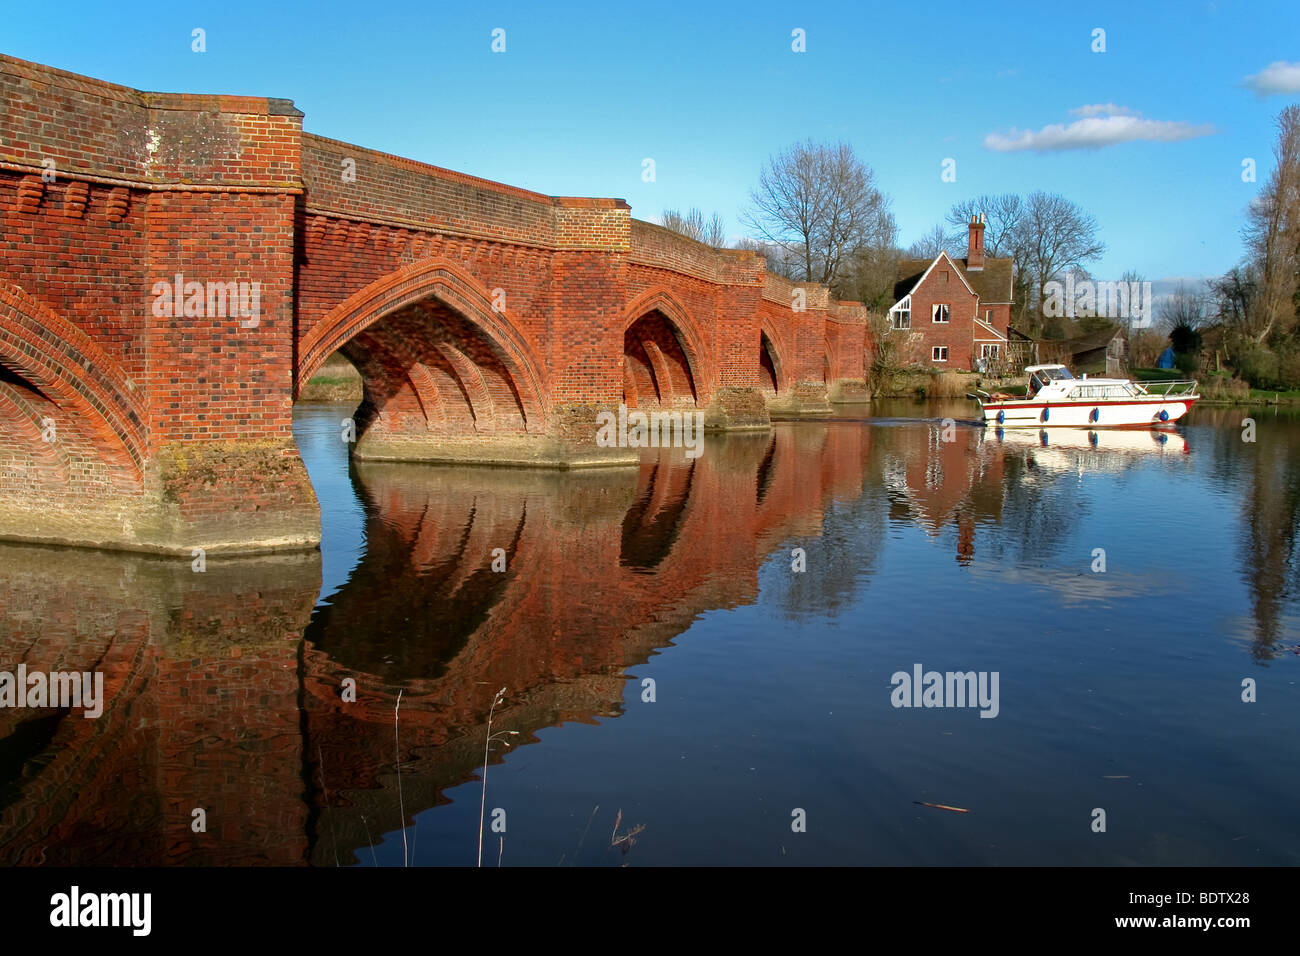 Close-up view of the arches of the Clifton Hampden bridge Stock Photo